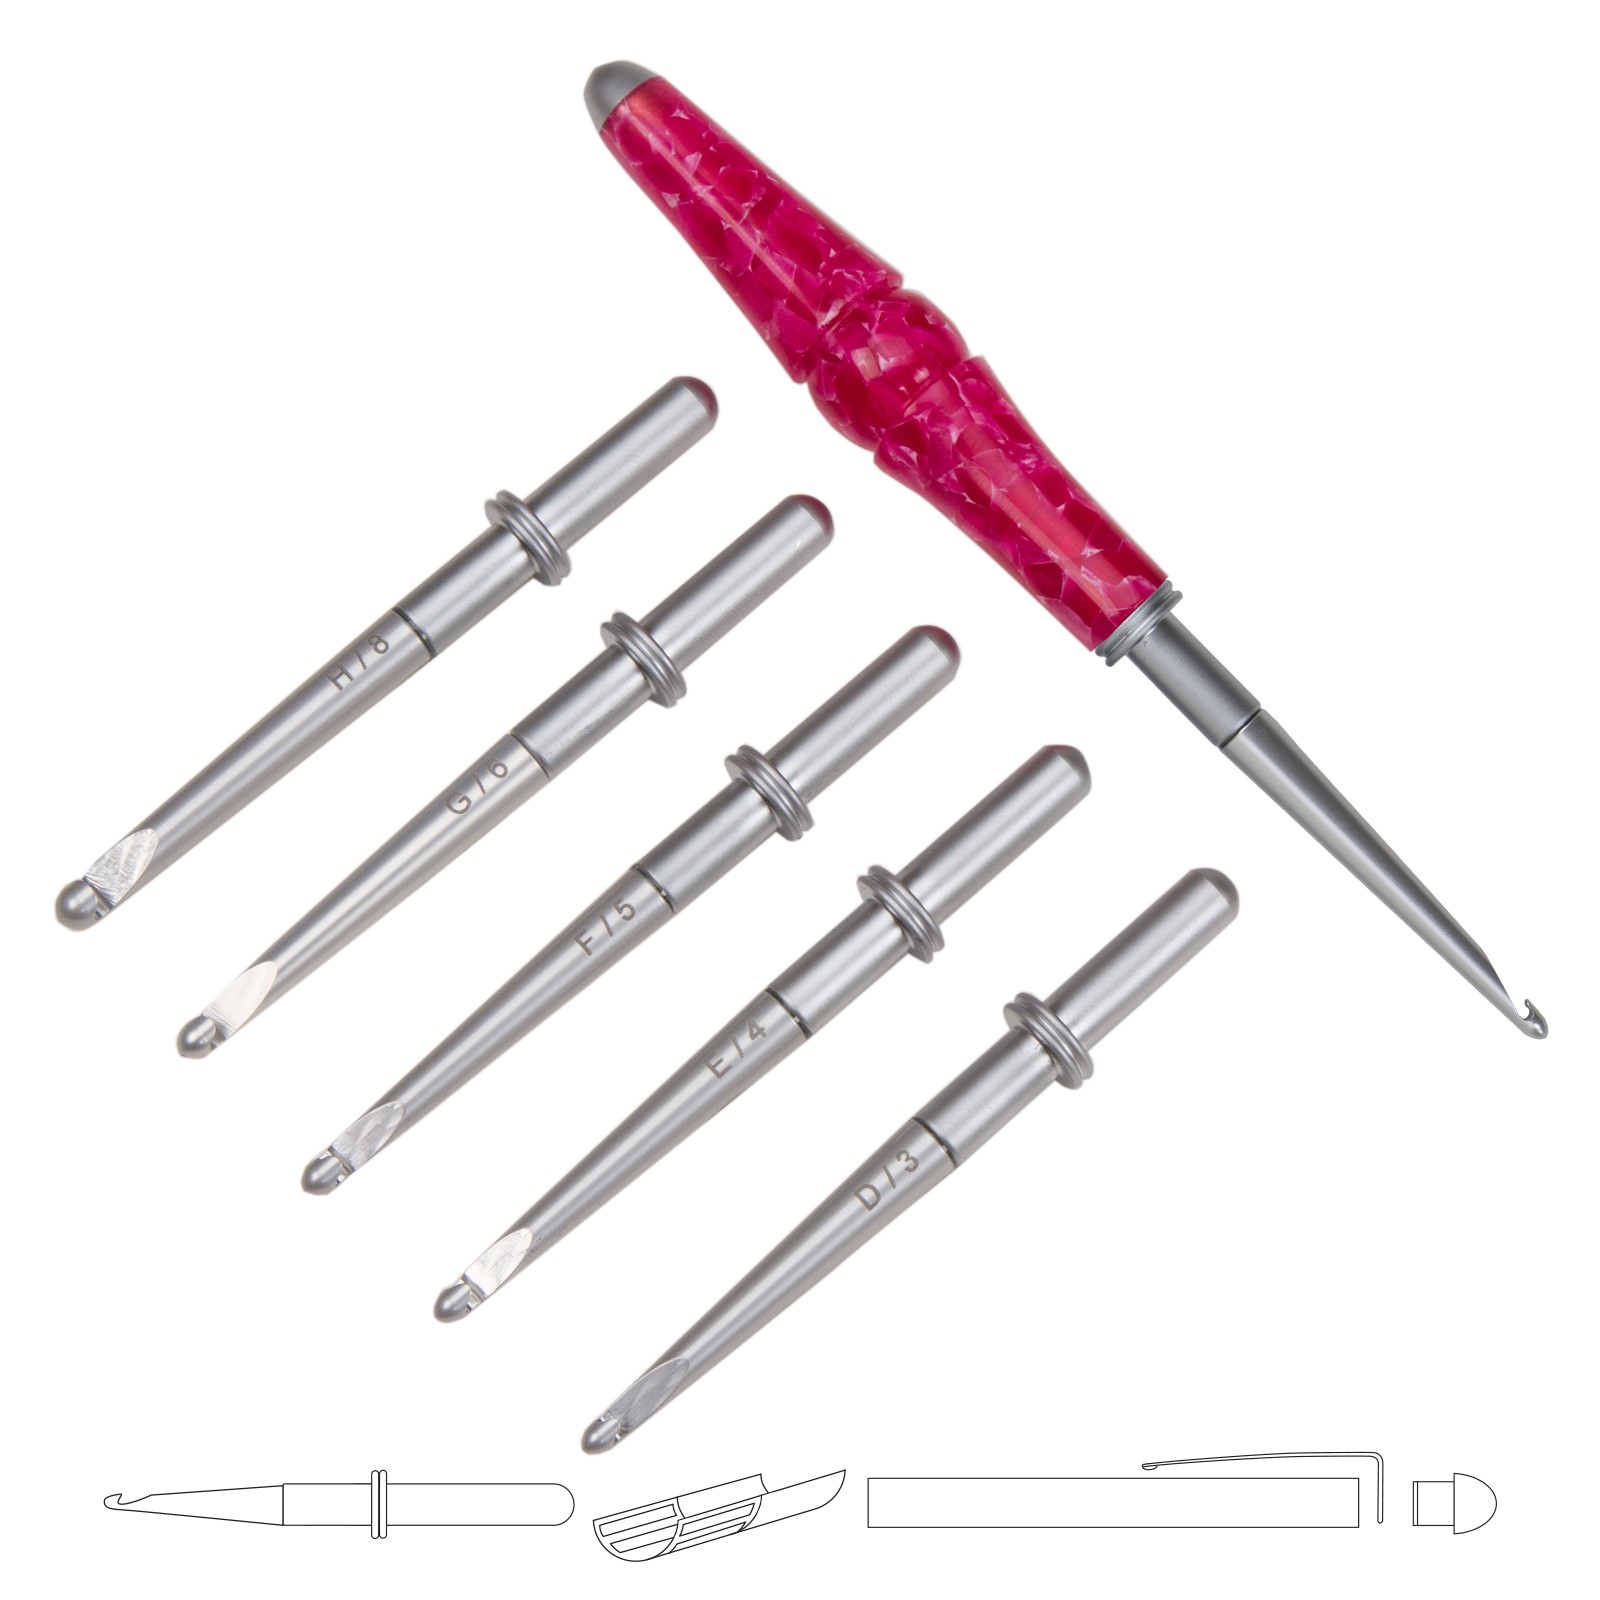 Review: Crochet Hook Set - The Perfect Tools for Your Crafting